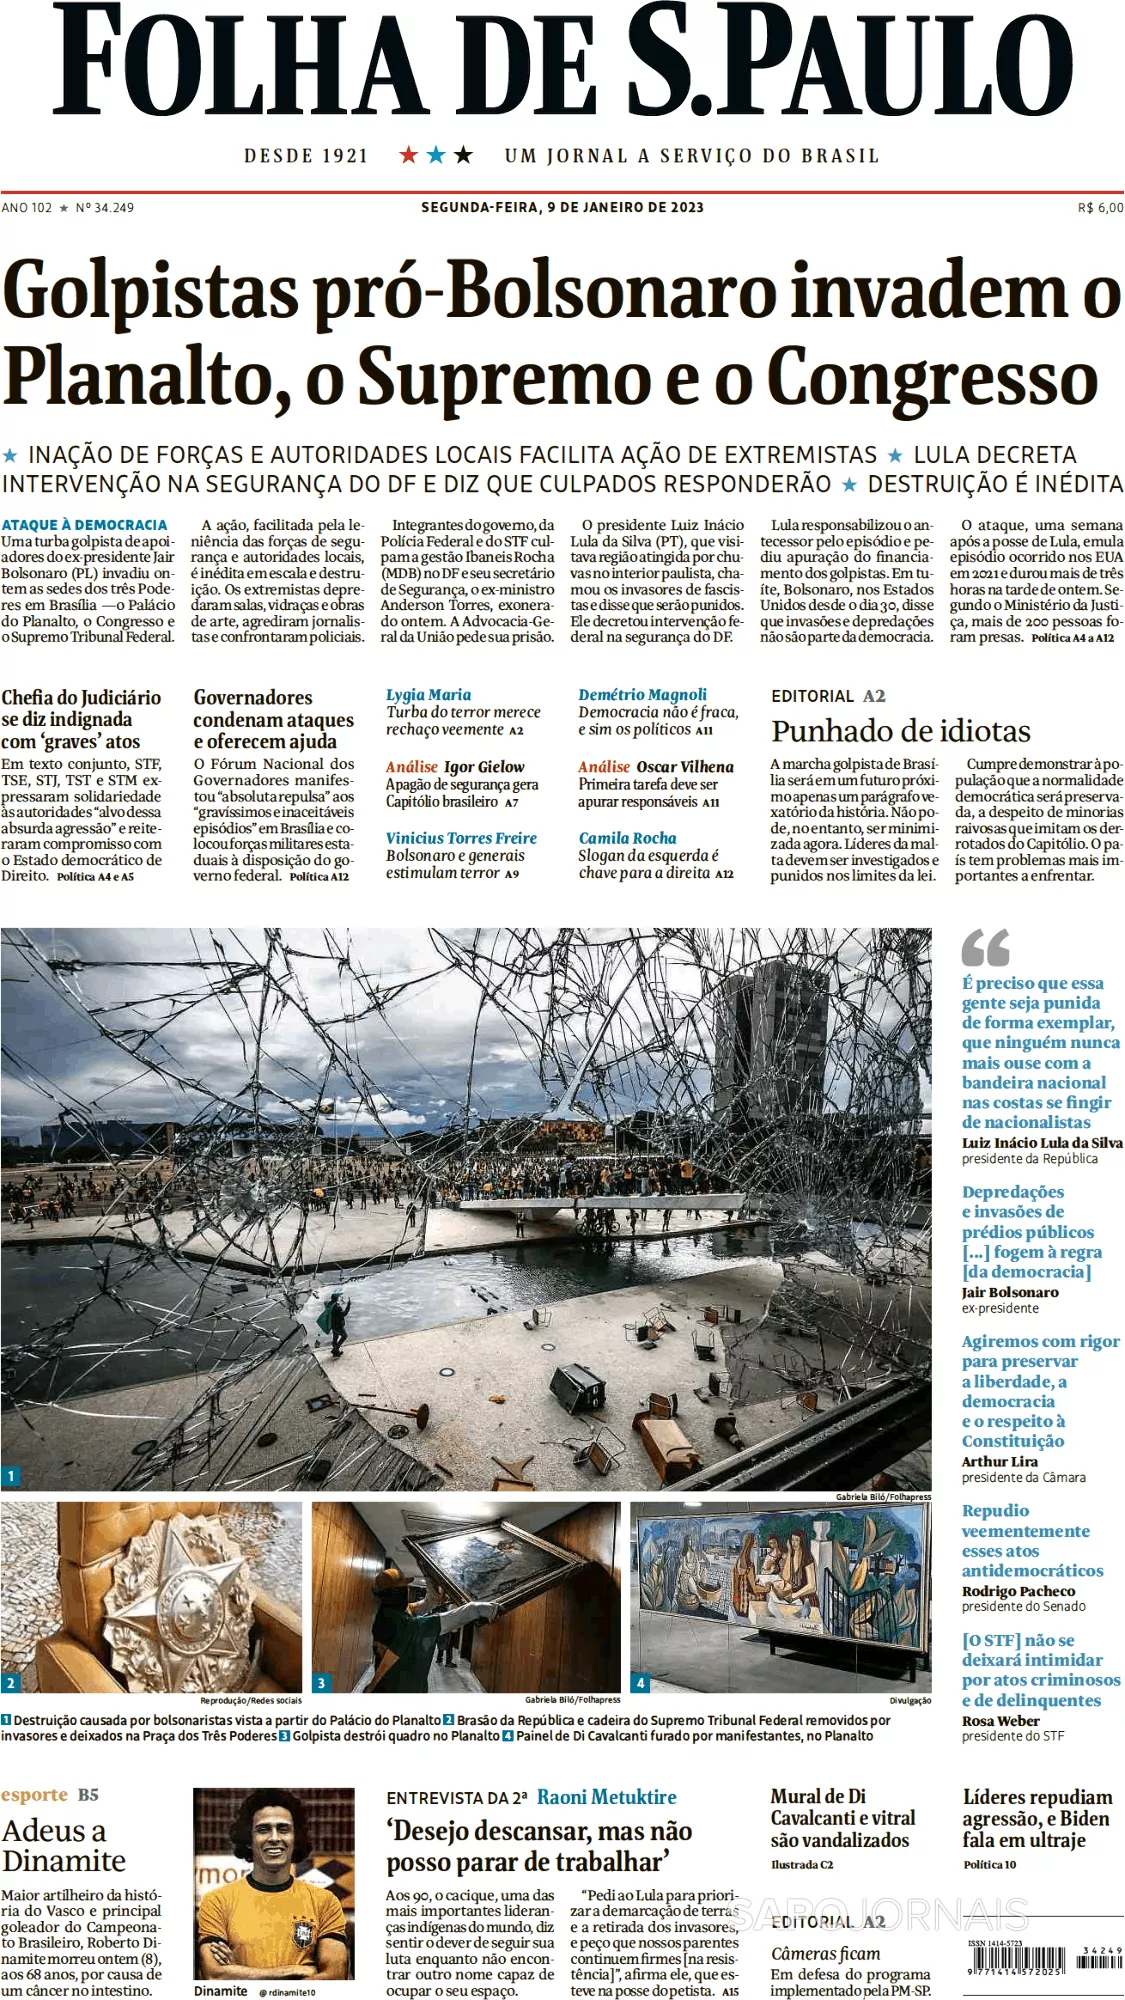 Cover of Folha de S.Paulo newspaper of the January 10, 2023 edition